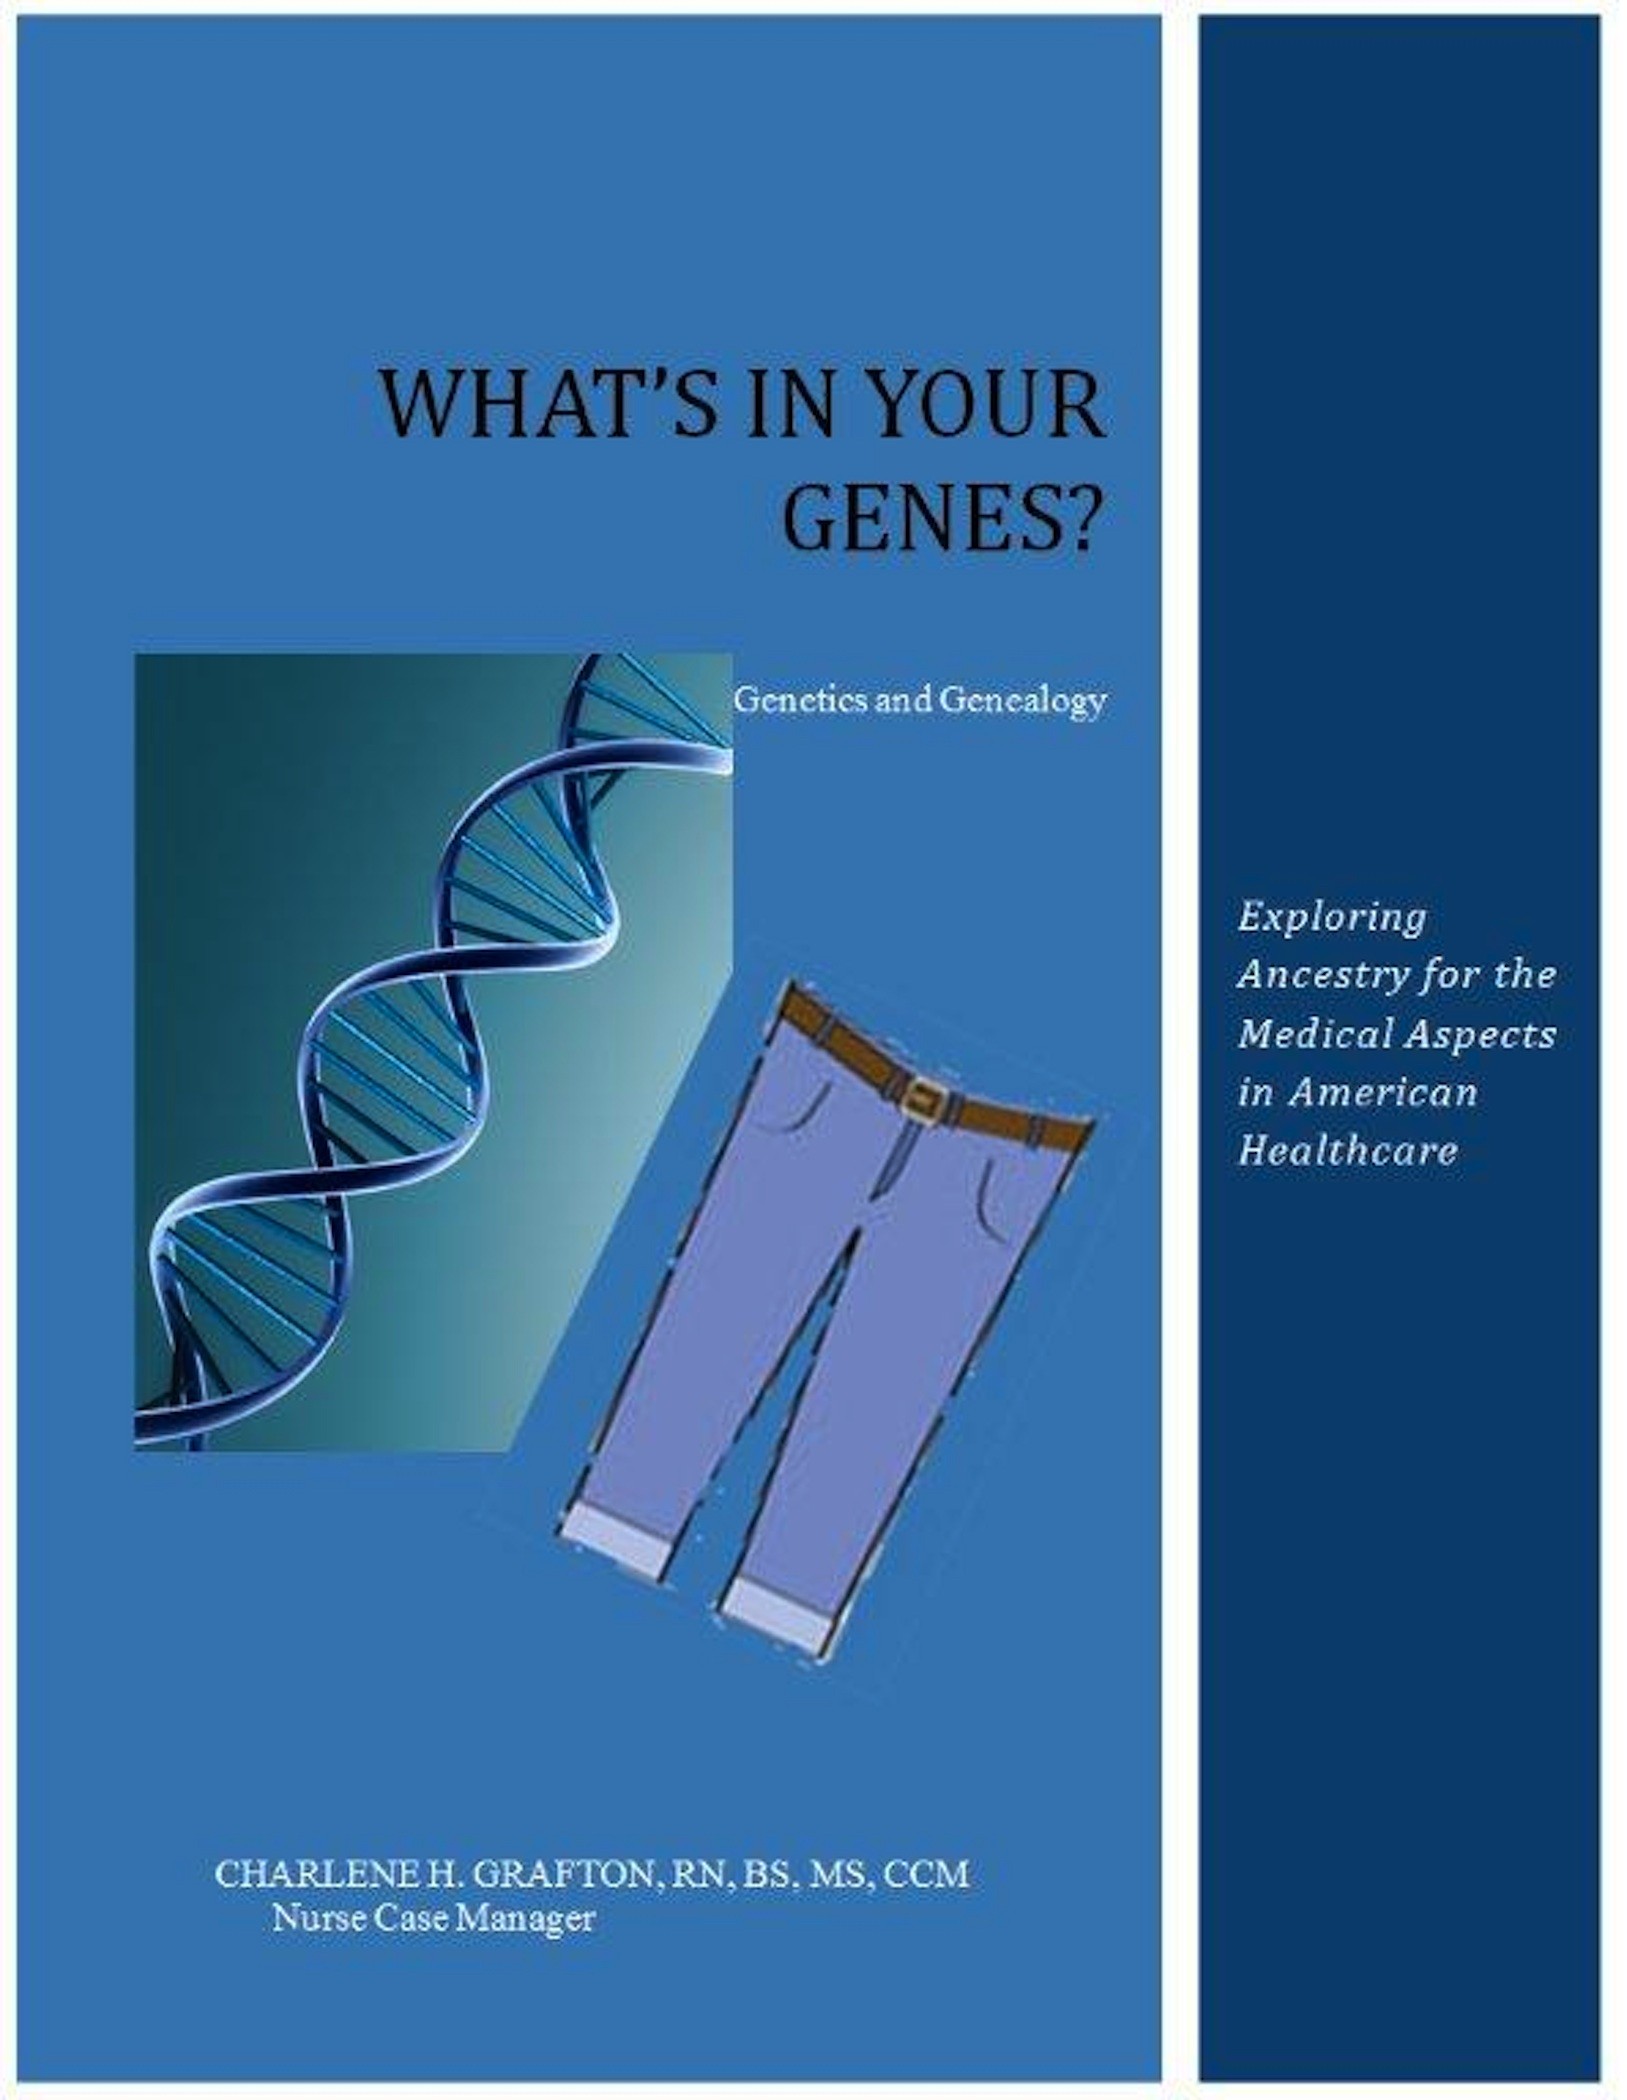 What's In Your Genes?